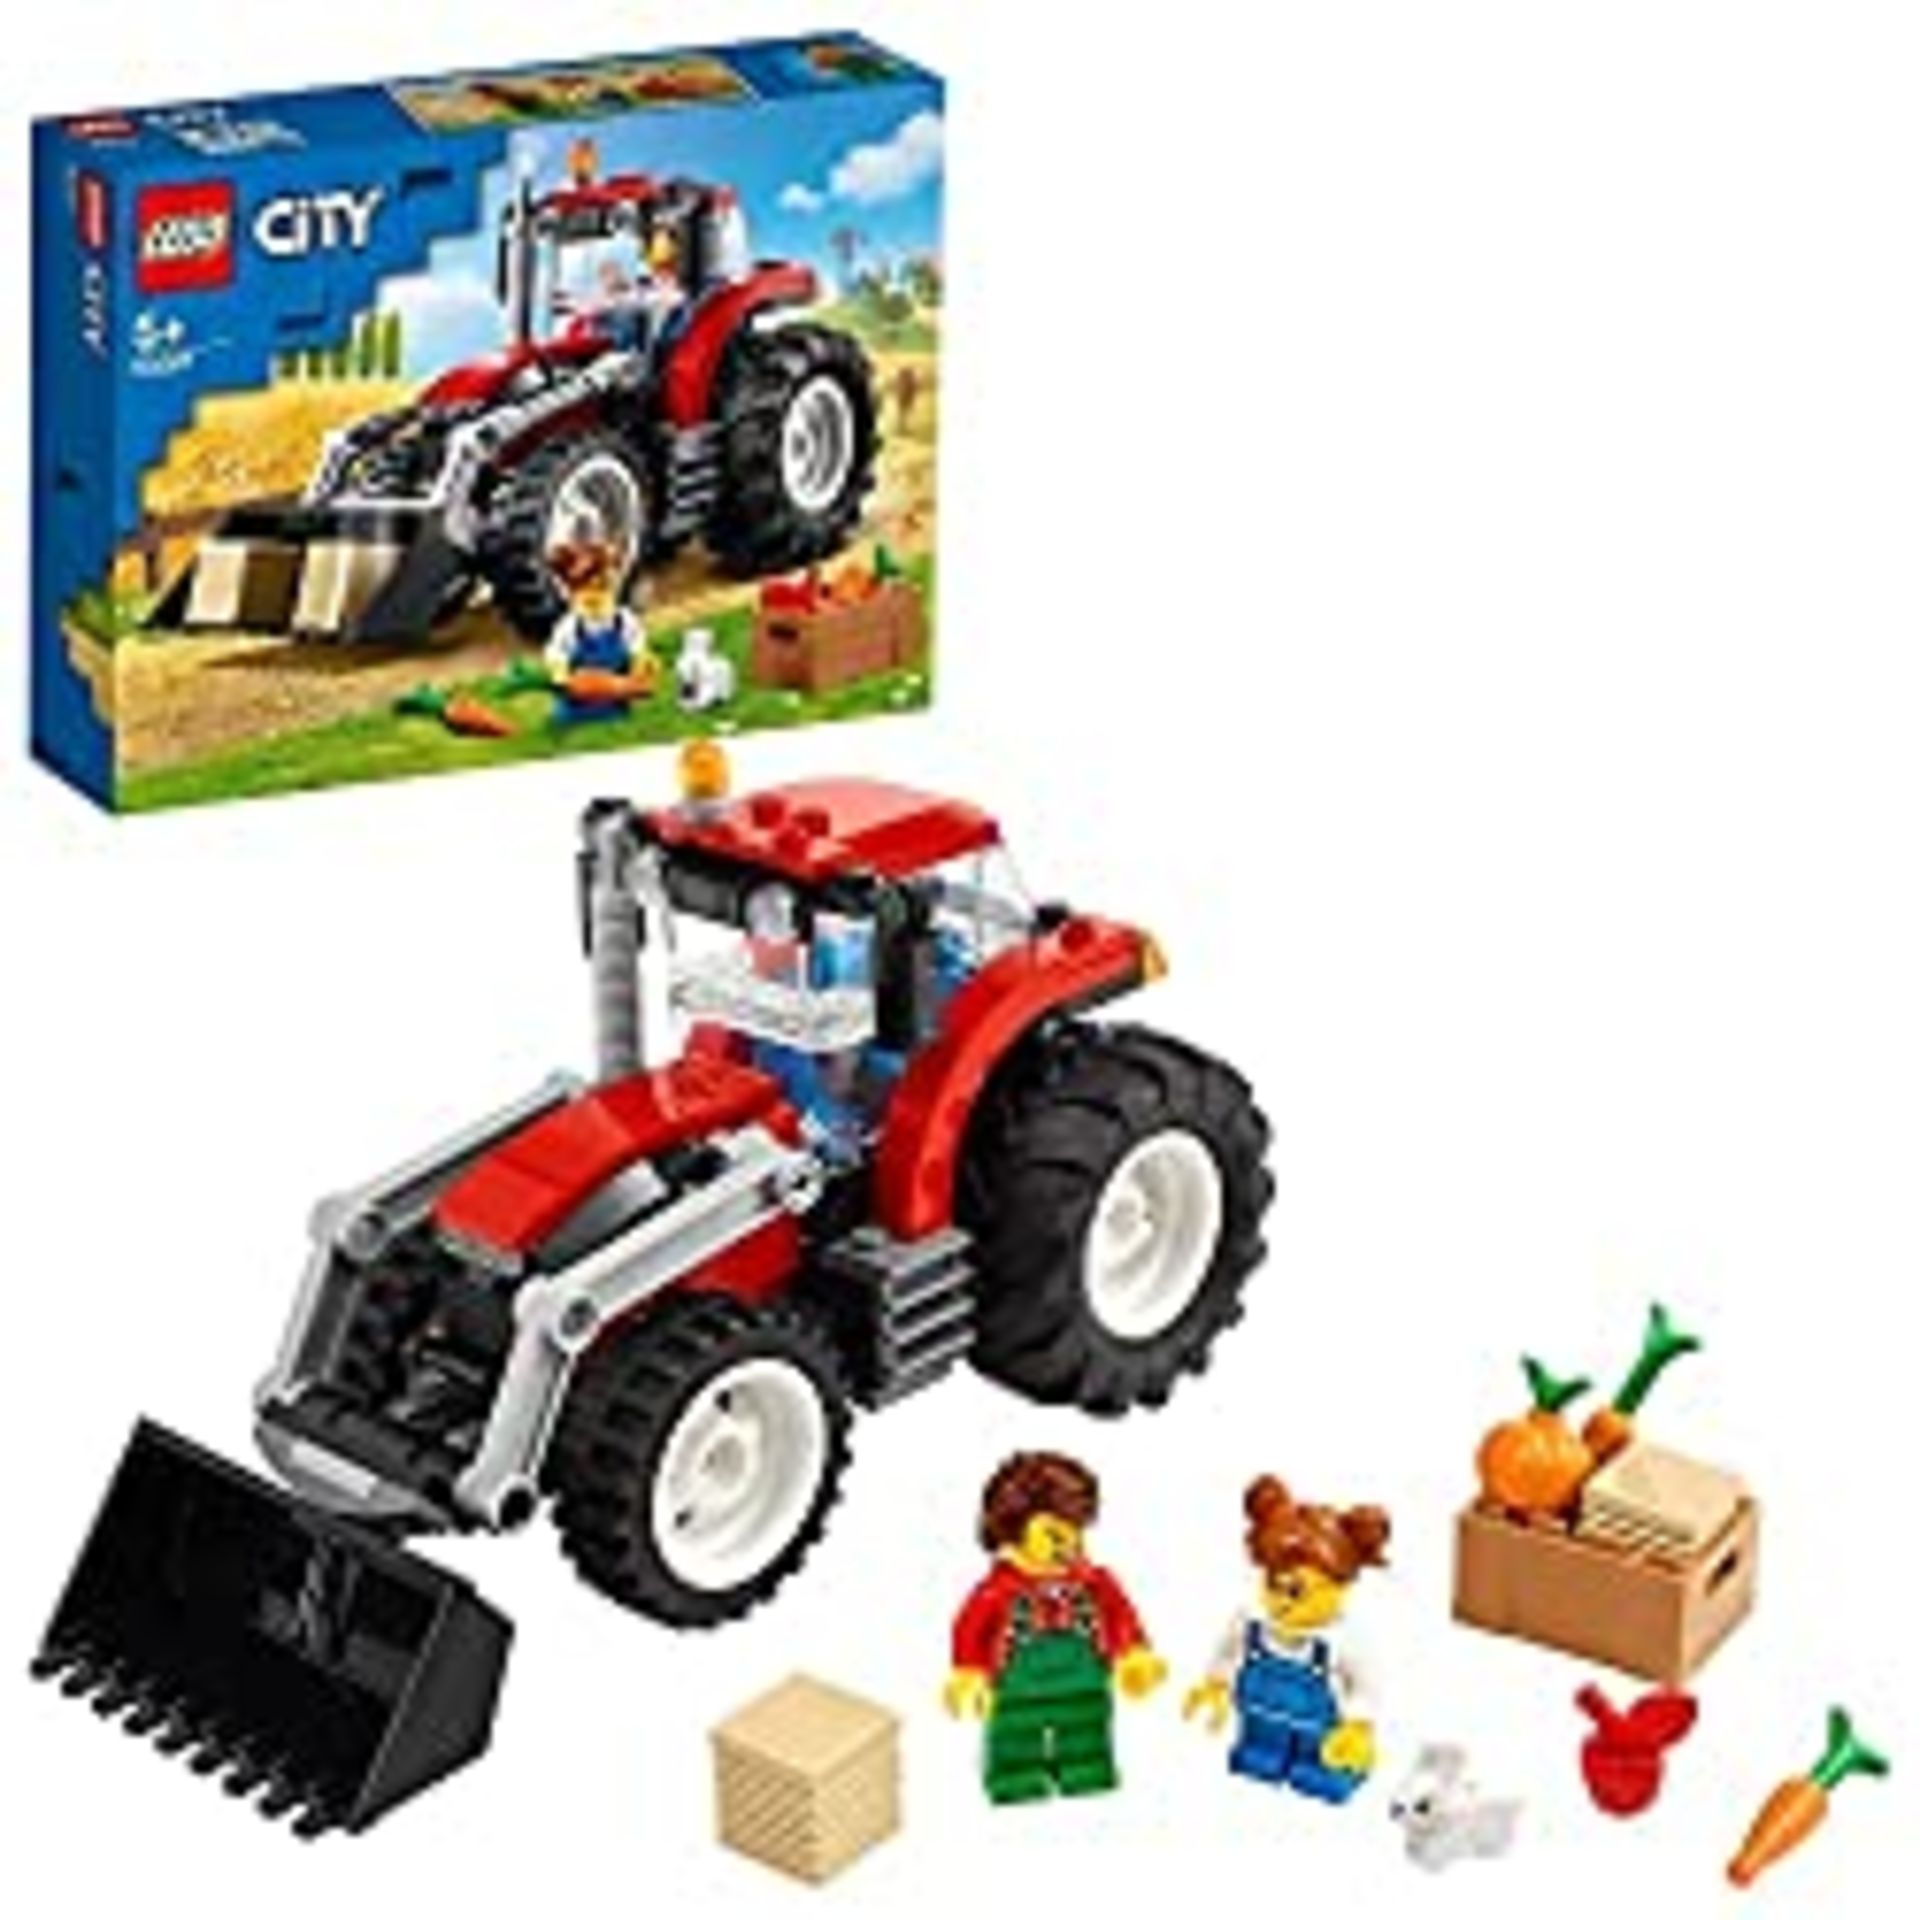 RRP £11.95 LEGO 60287 City Great Vehicles Tractor Toy - Image 2 of 4